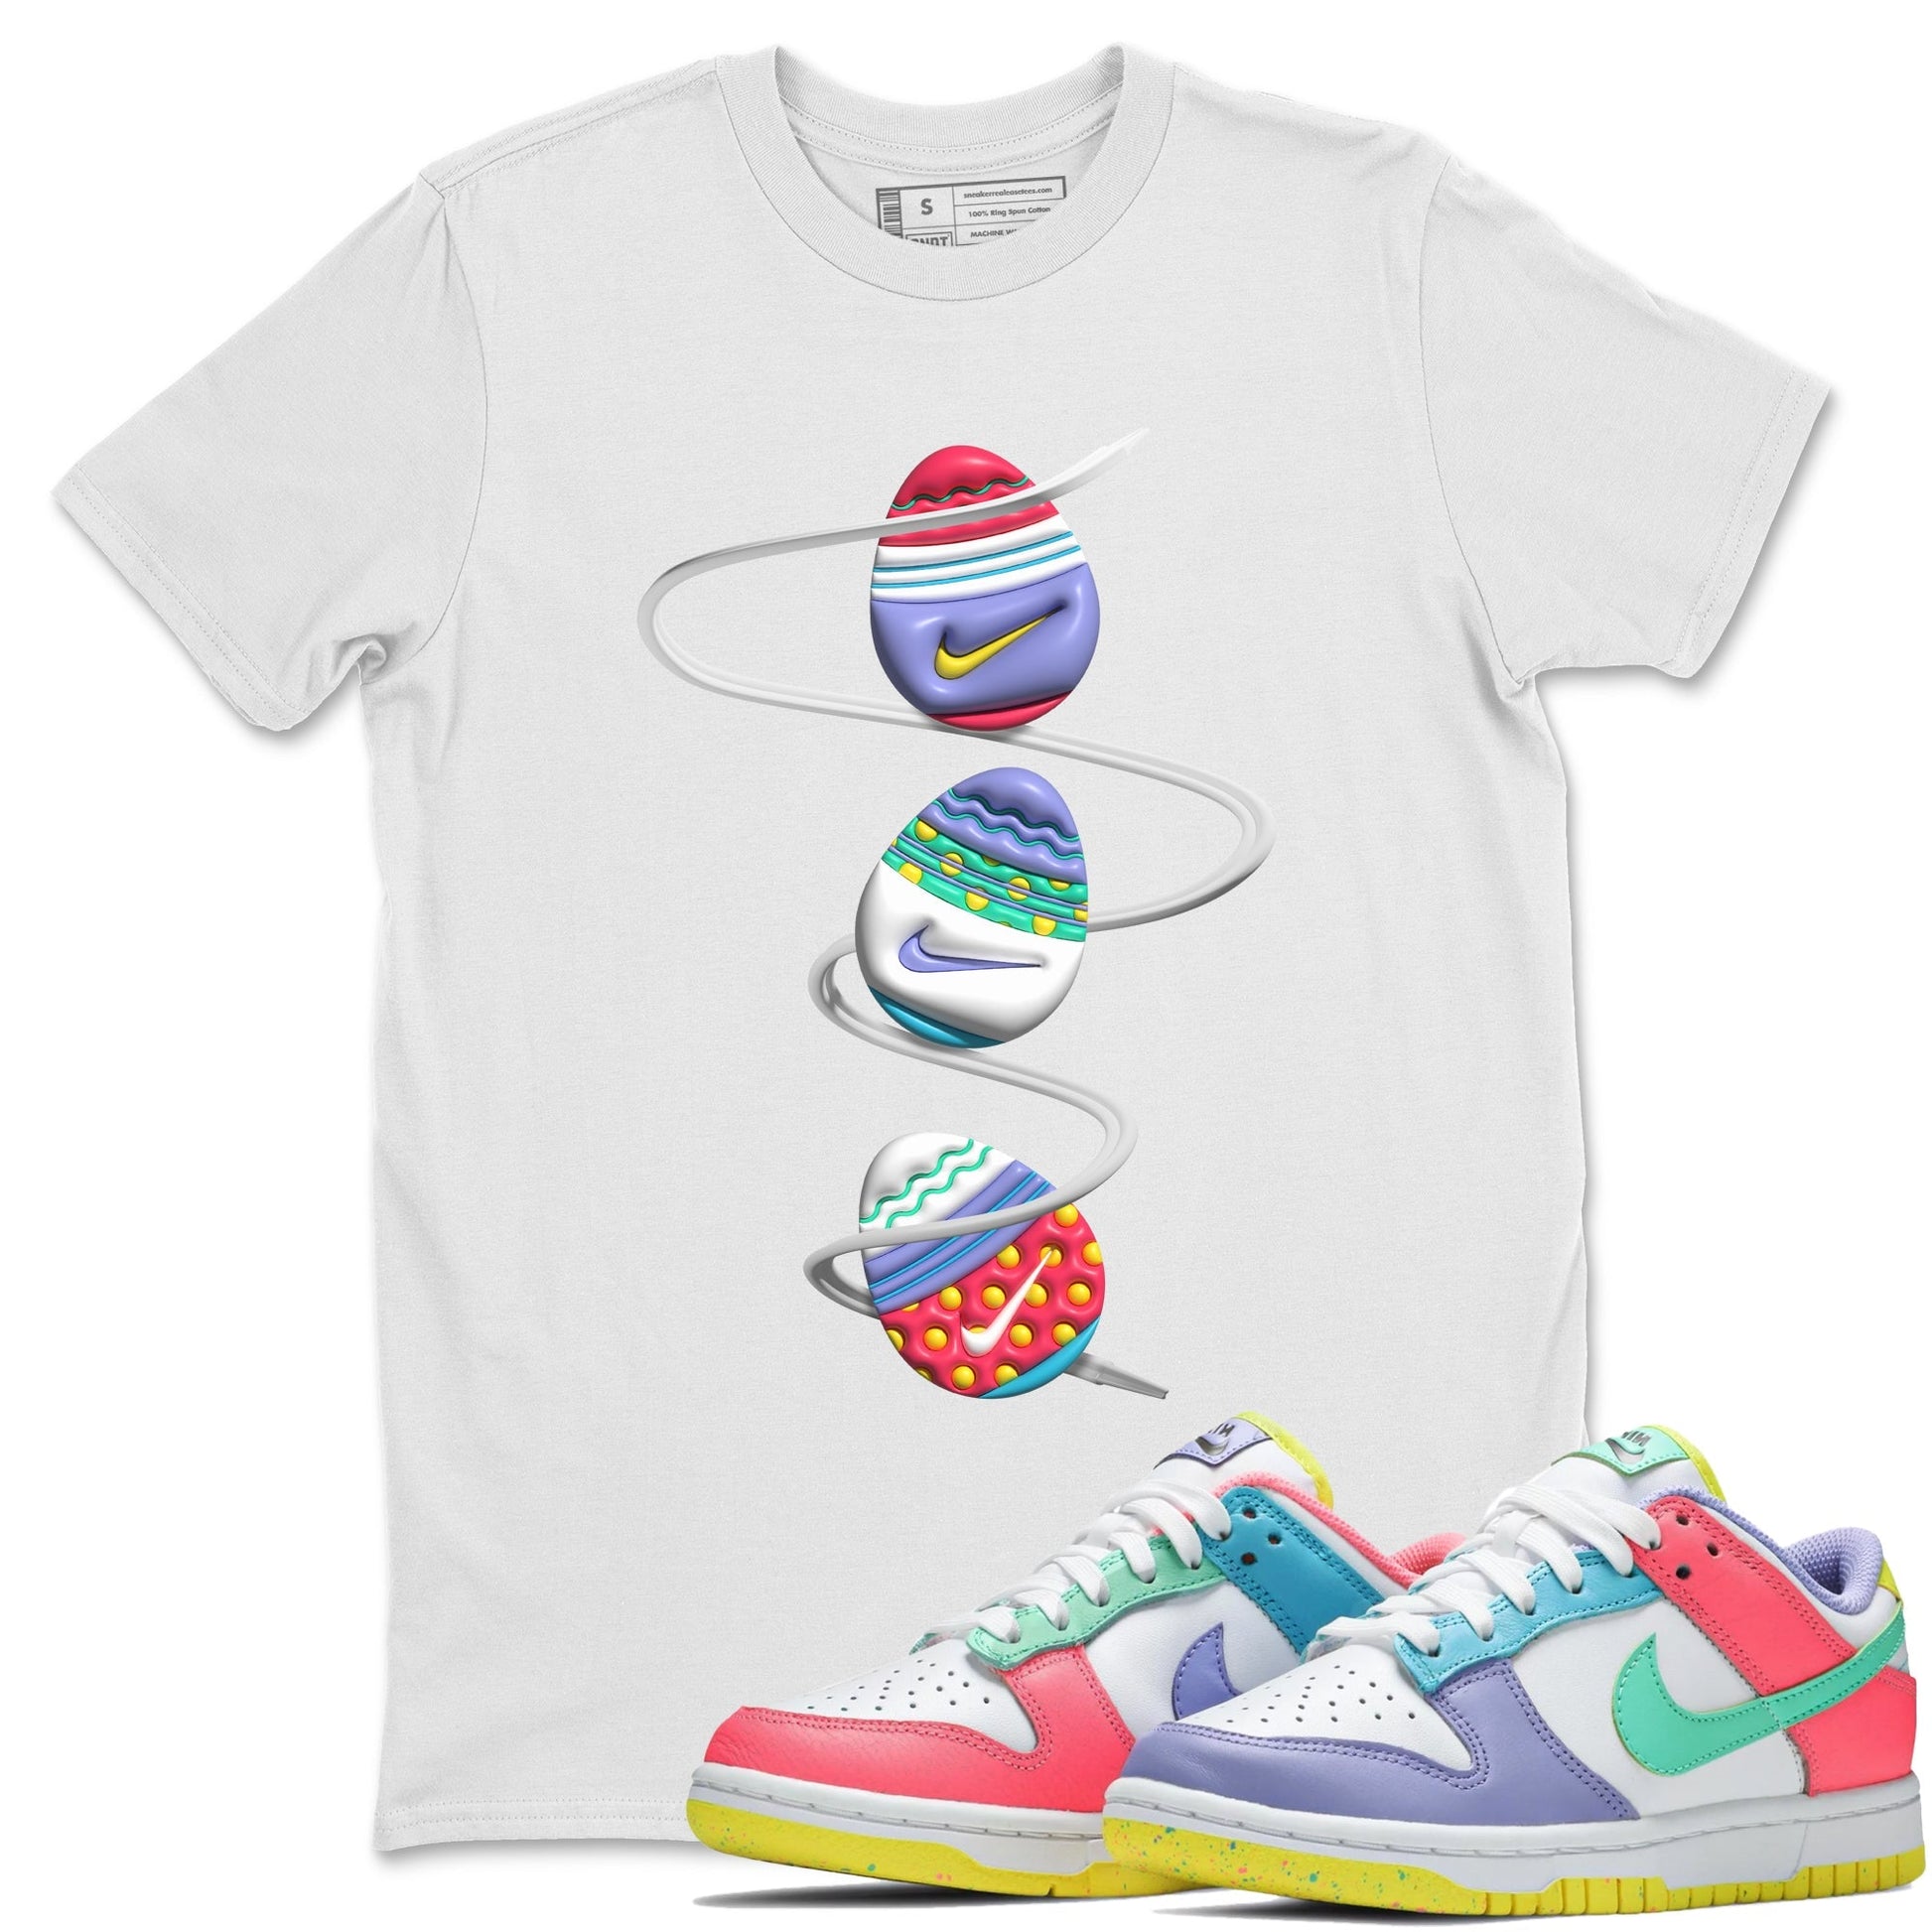 Dunk Easter Candy Sneaker Tees Drip Gear Zone 3D Easter Eggs Sneaker Tees Nike Easter Shirt Unisex Shirts White 1